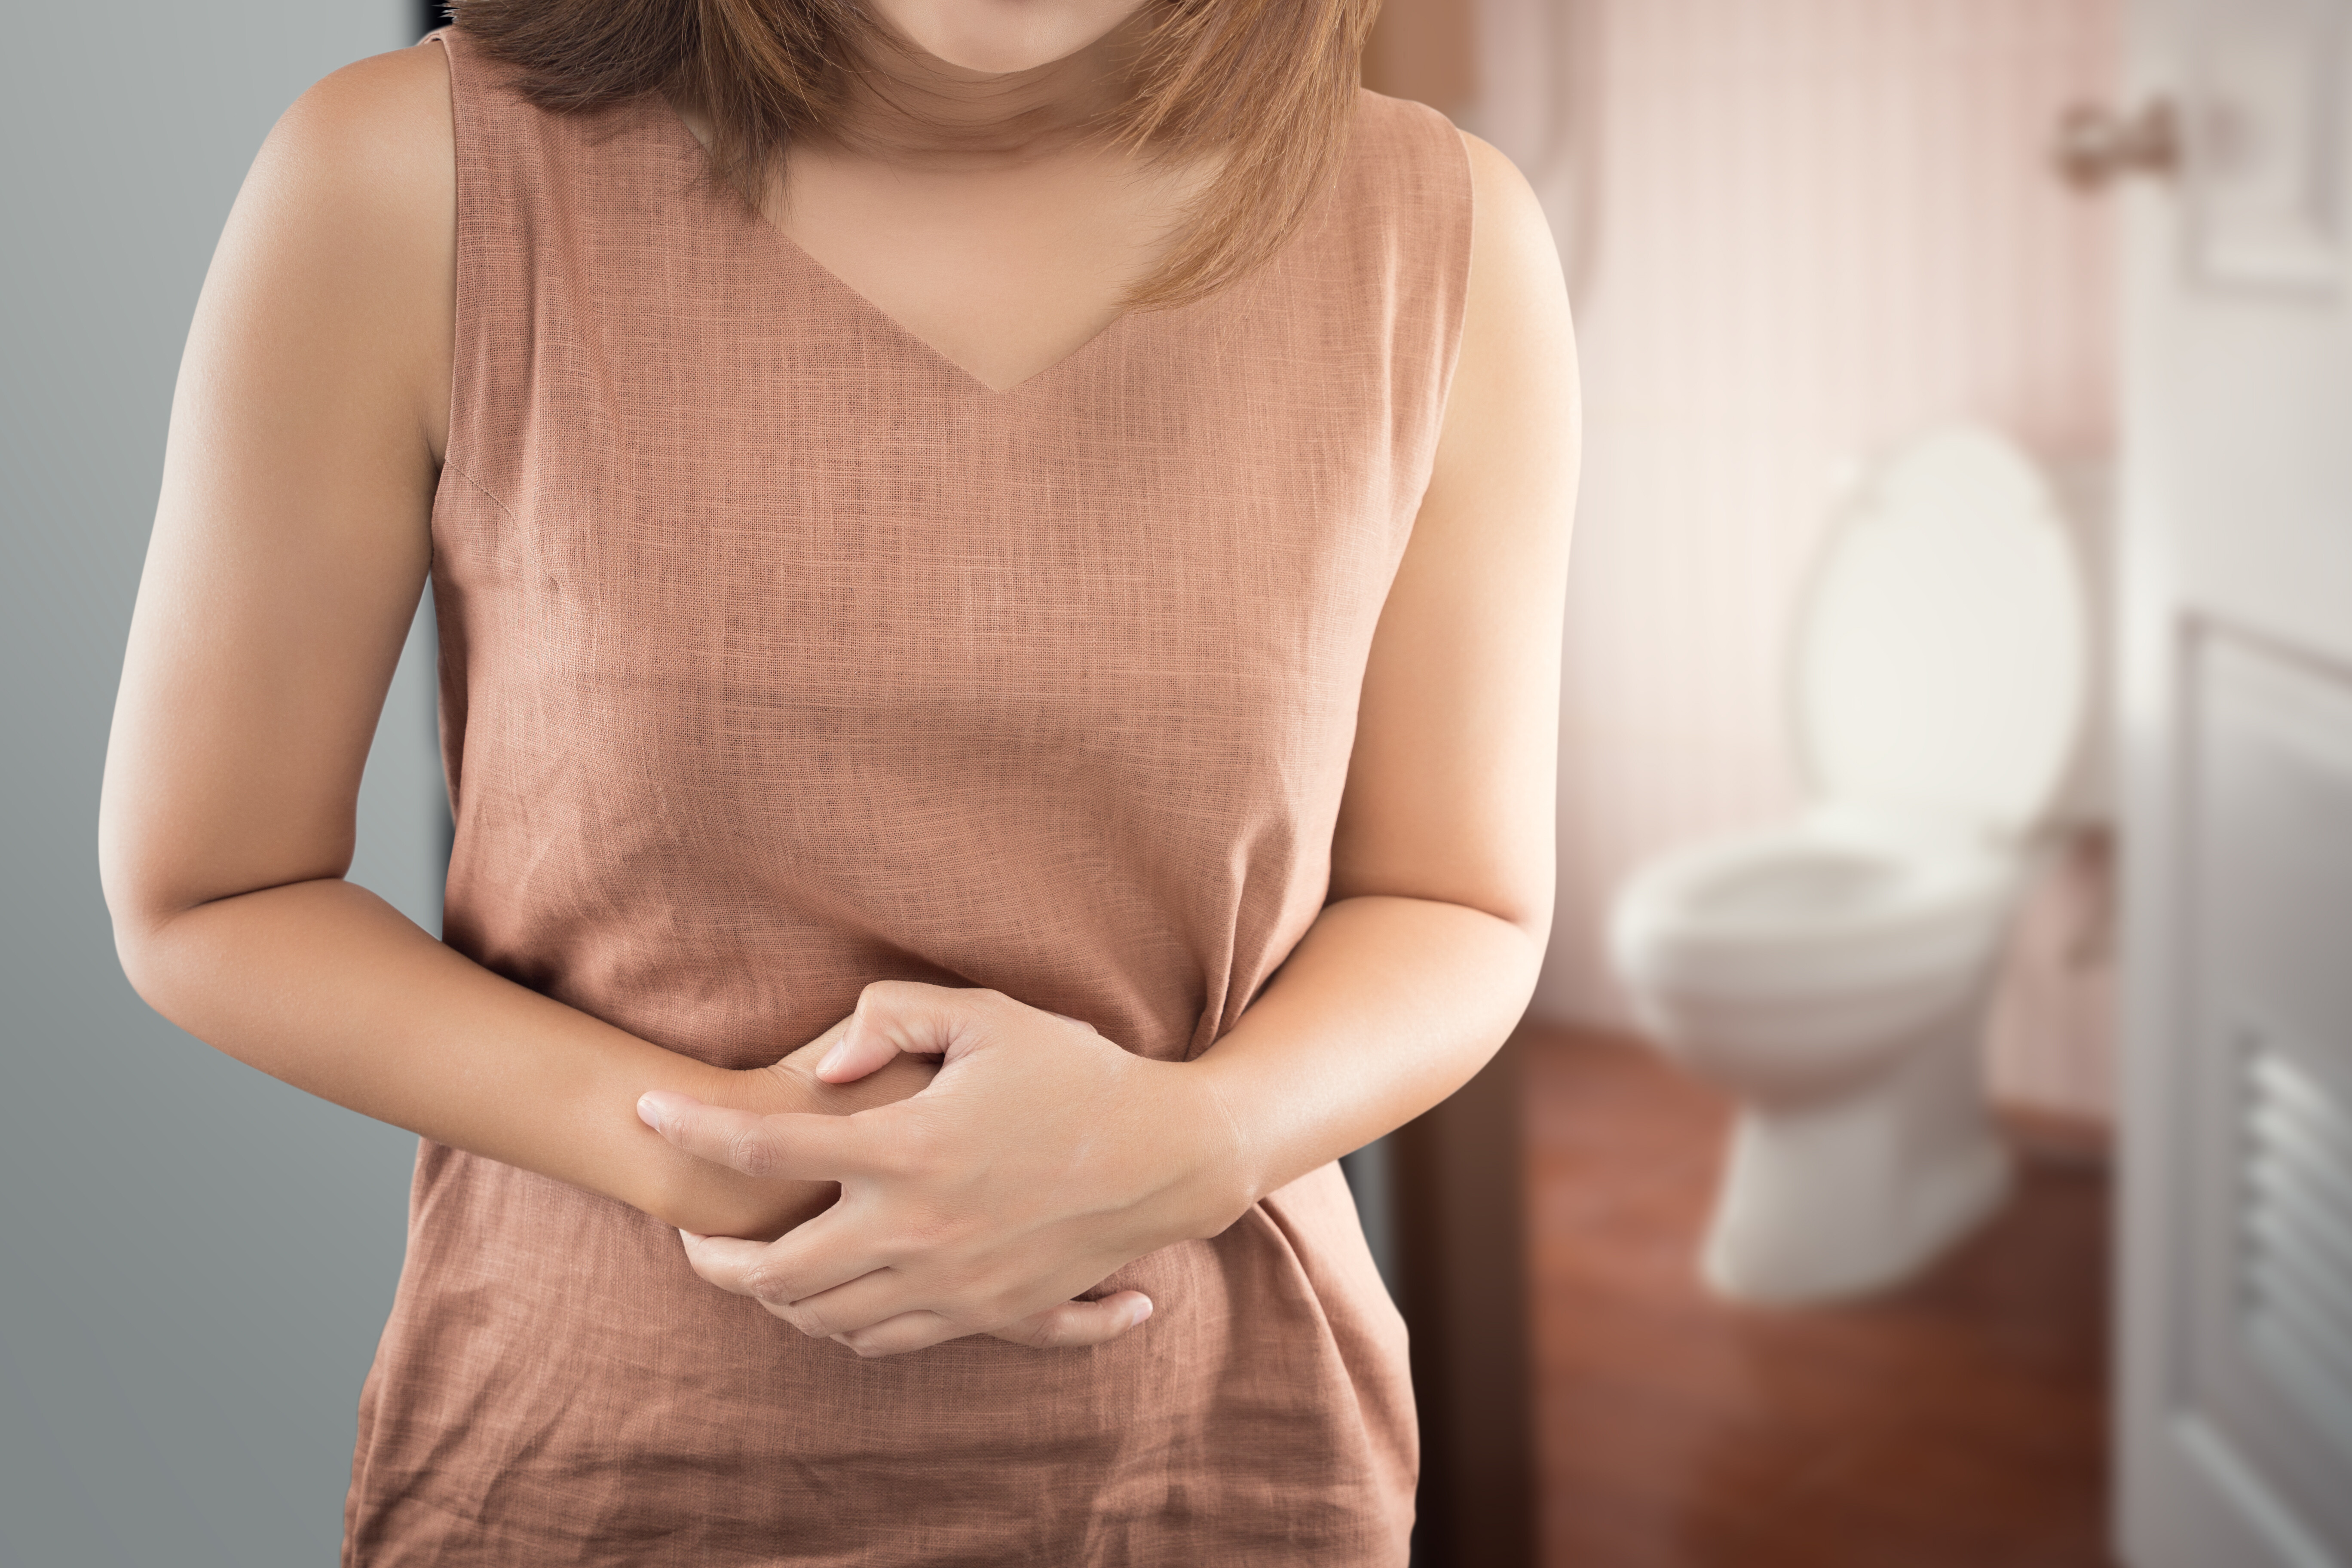 Does Microscopic Colitis Always Cause Fatigue?